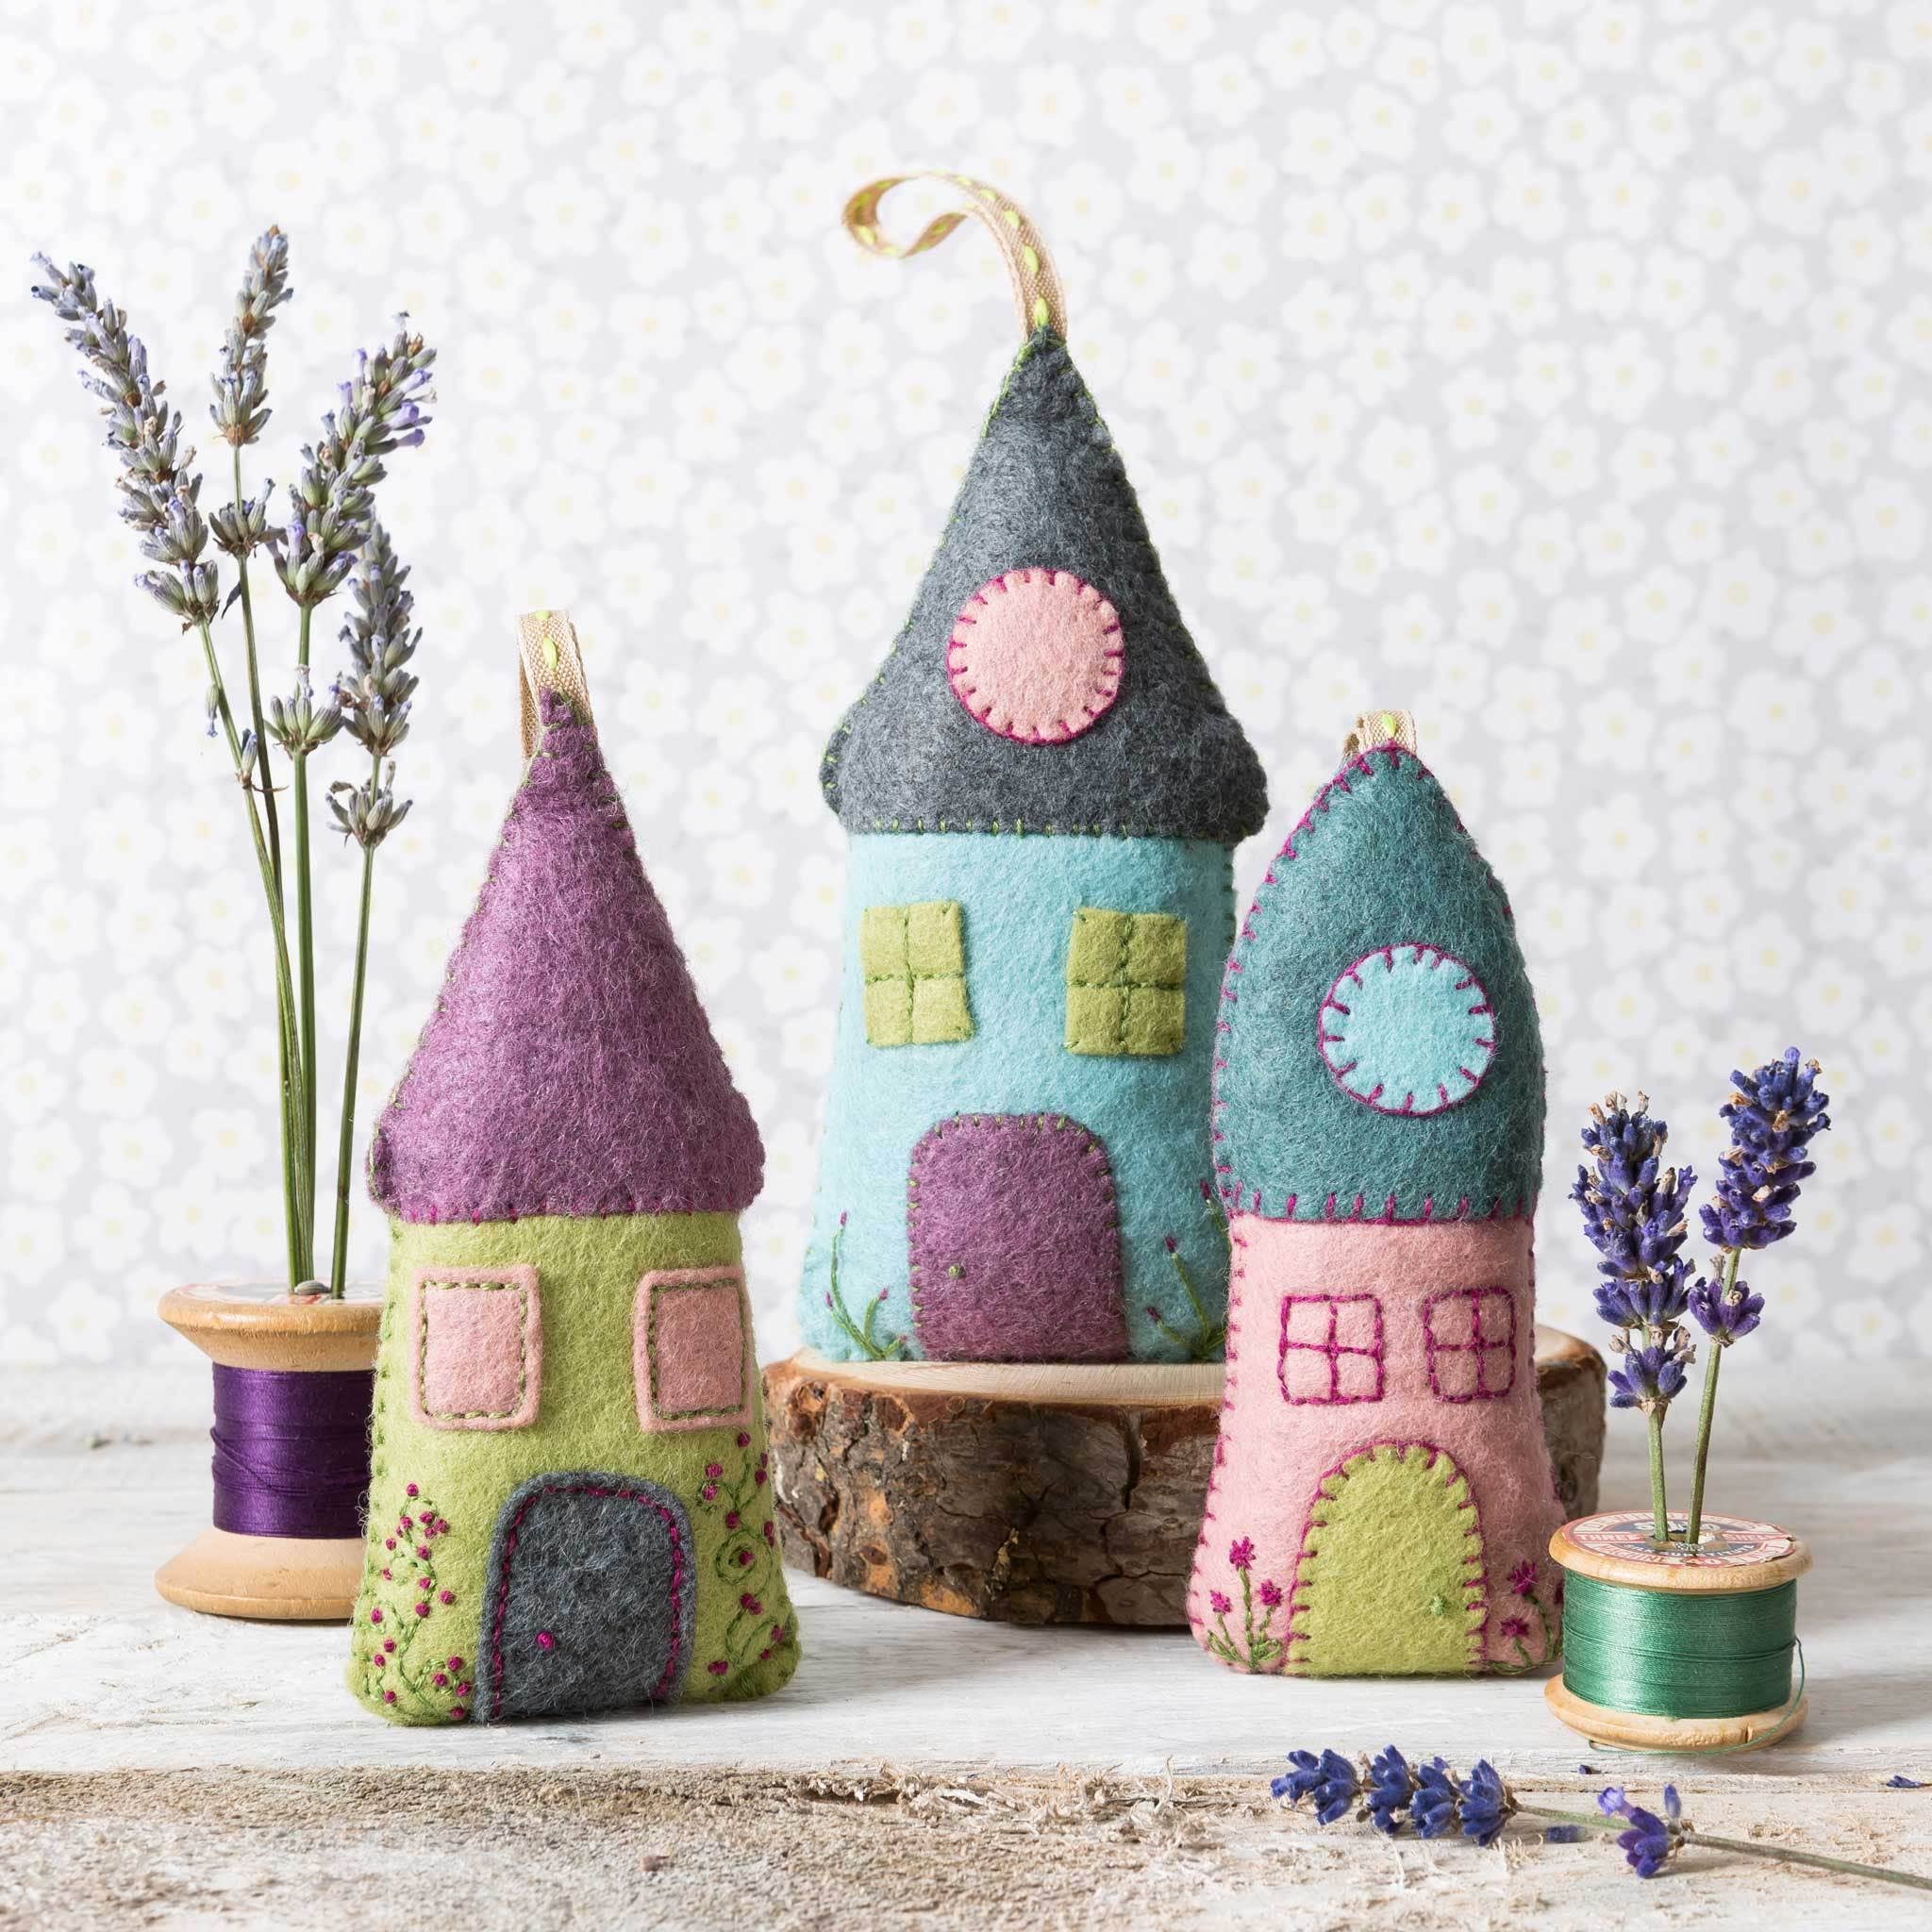 Lavender Houses  Felt Craft Kit: English - Out of the Blue